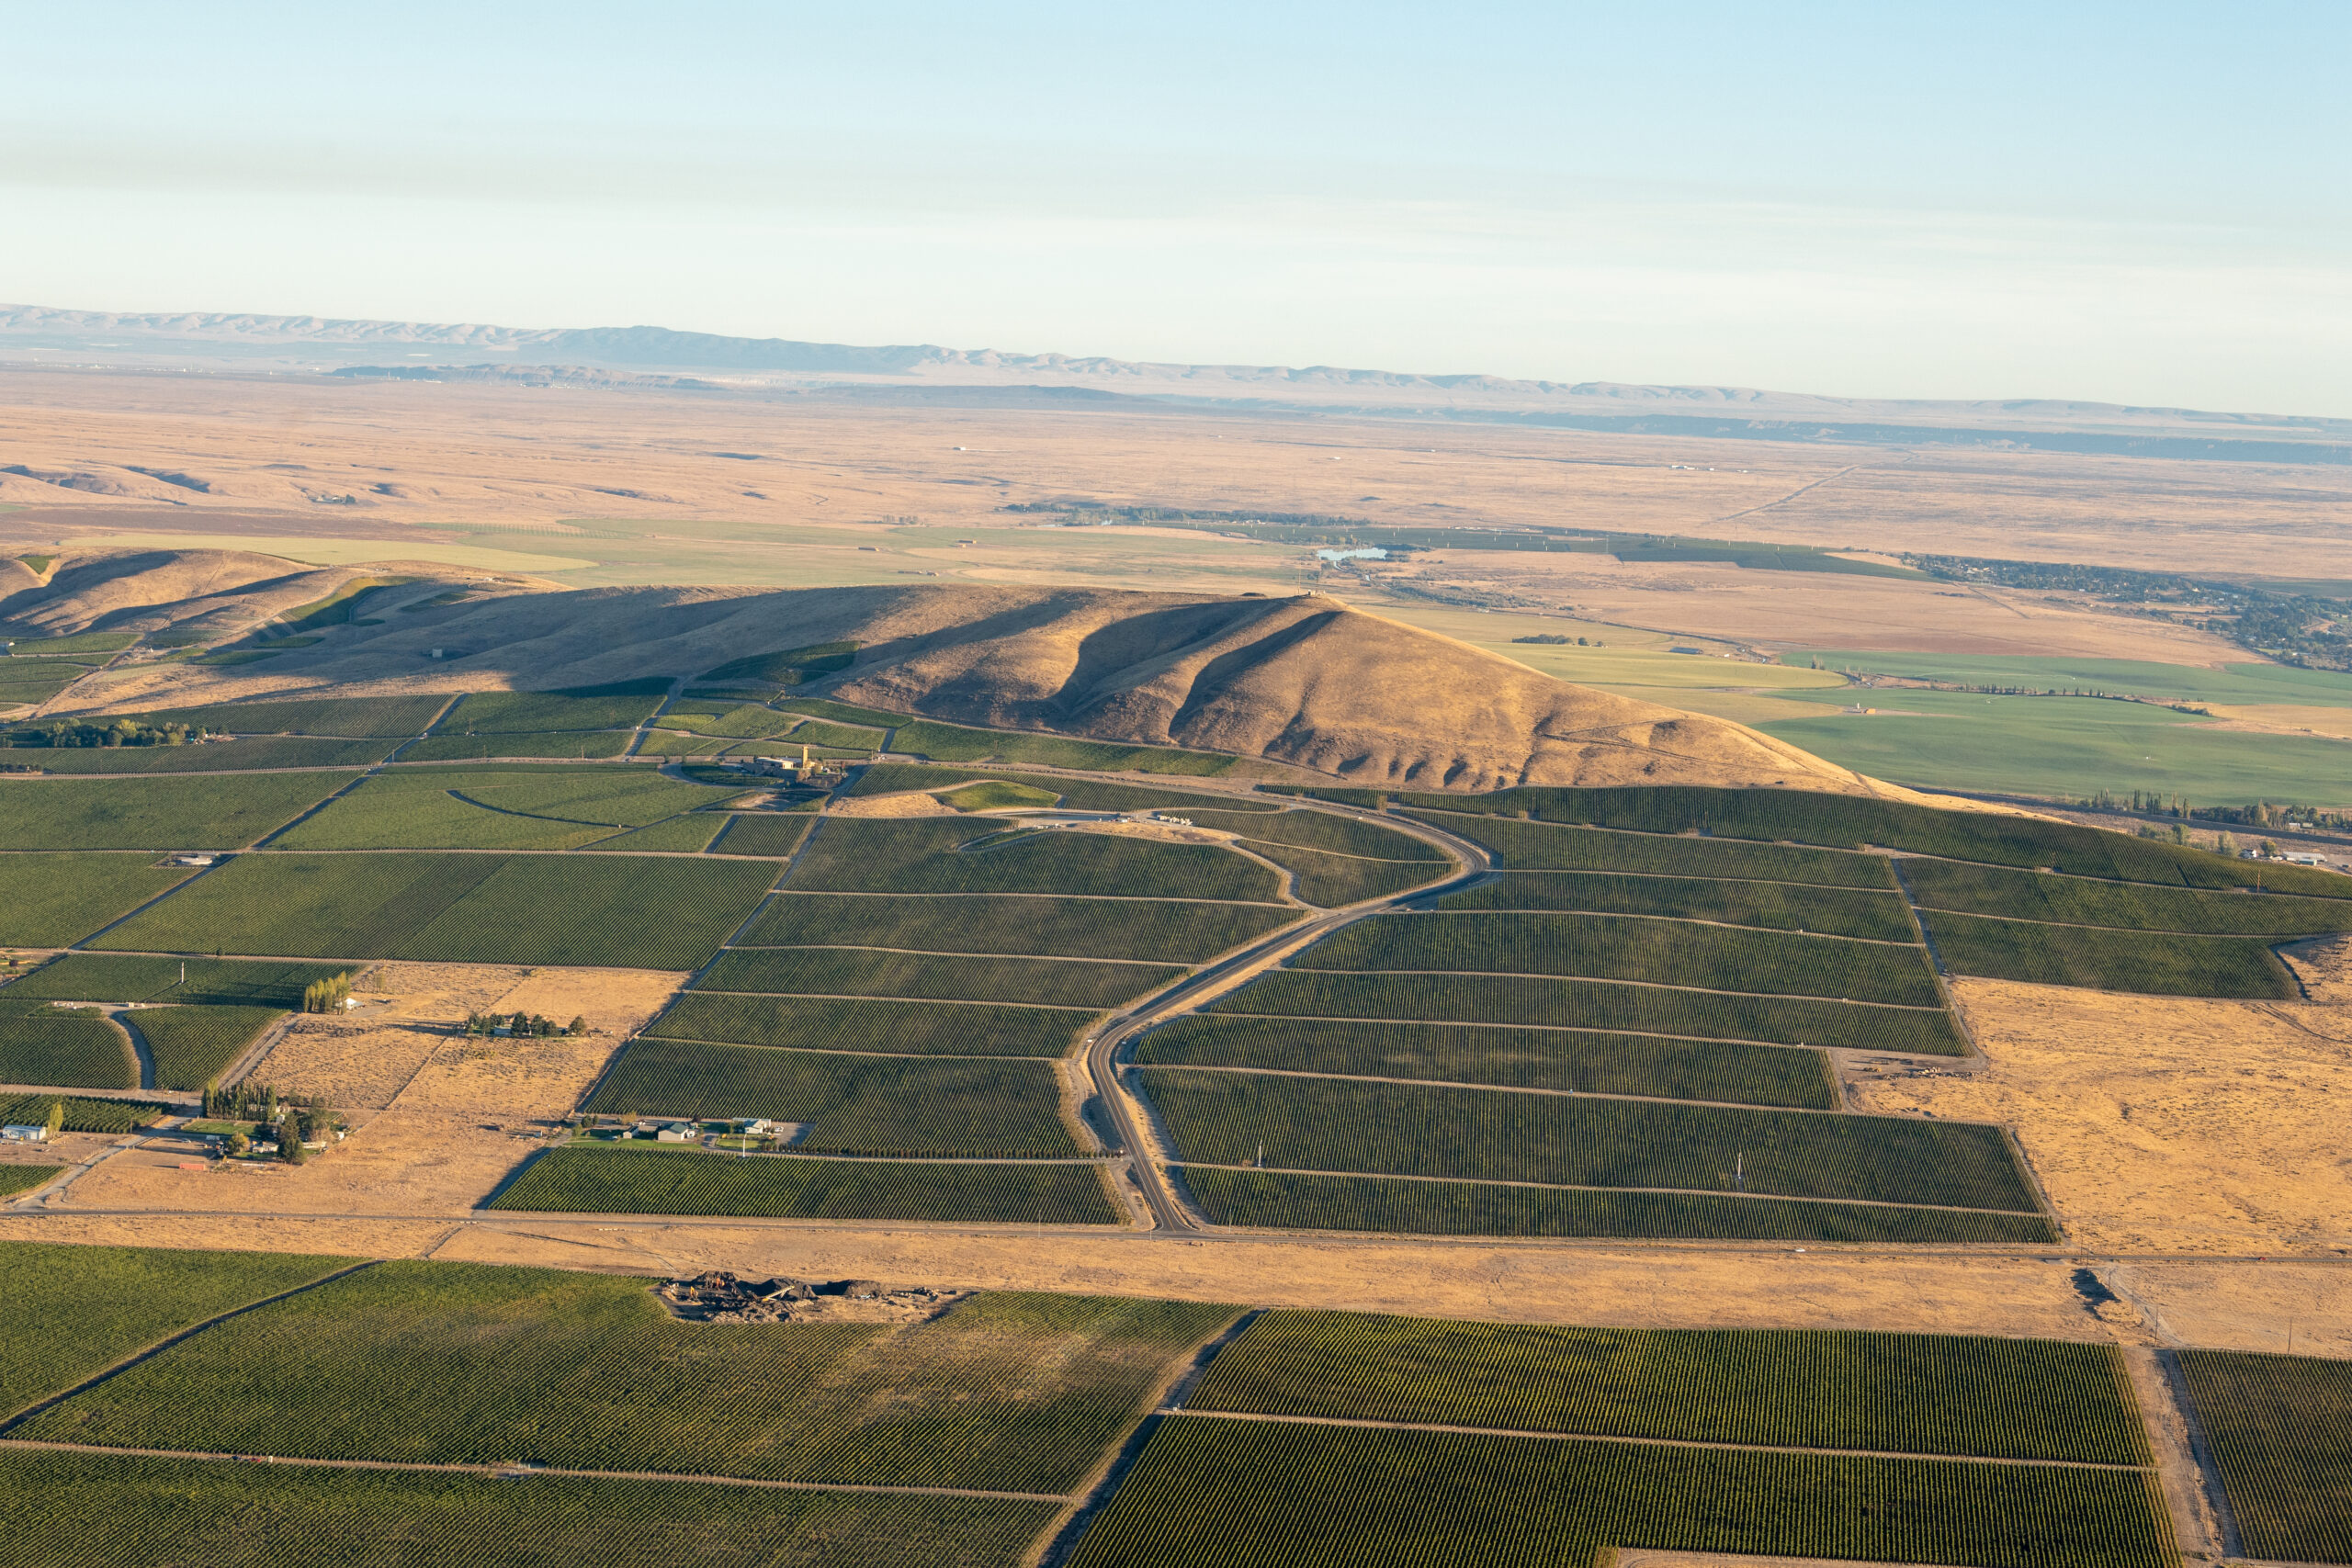 Aerial view of vineyards in rectangular blocks, with a large hill behind the blocks and mountains in the distance.